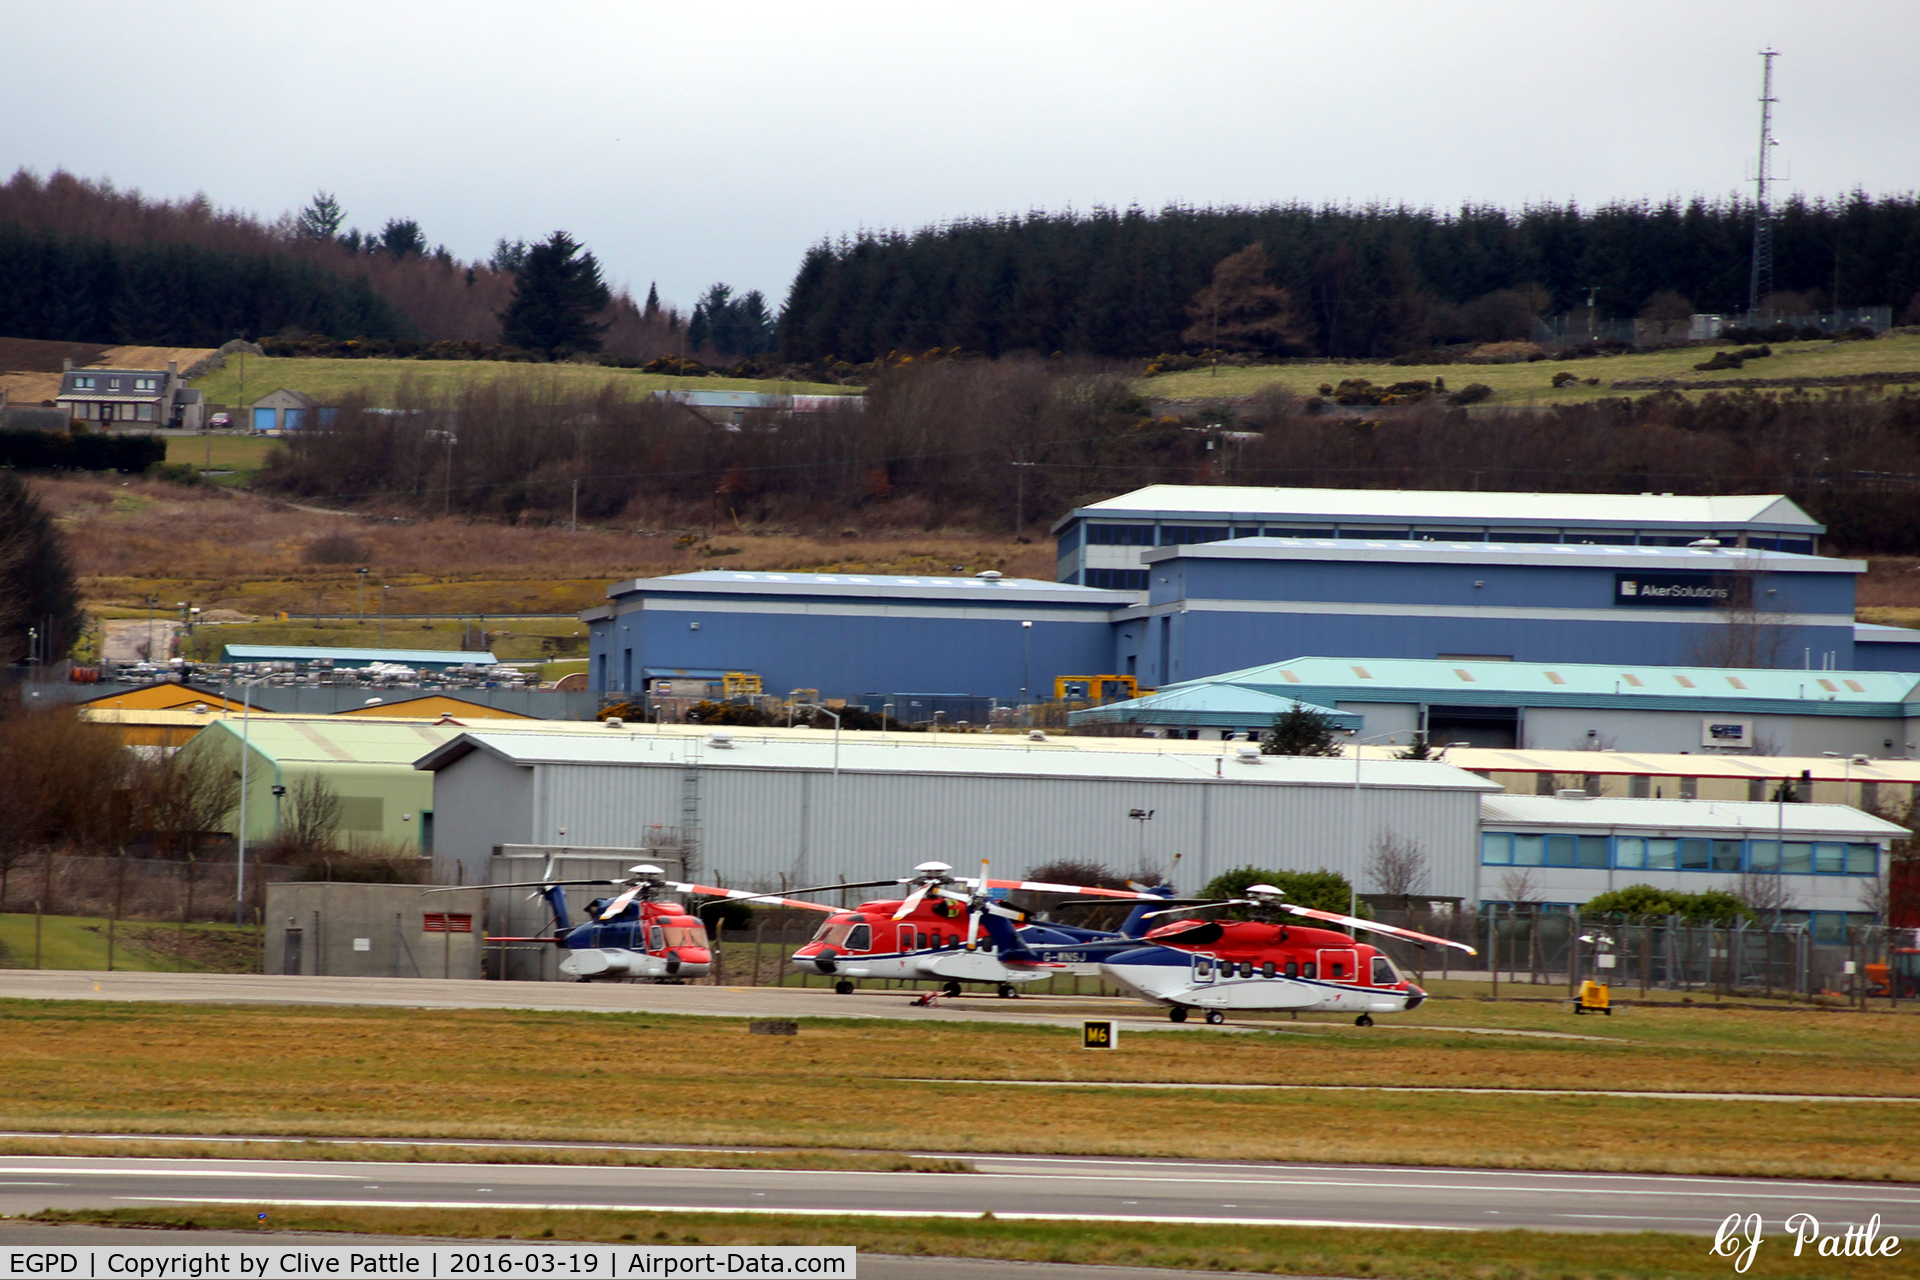 Aberdeen Airport, Aberdeen, Scotland United Kingdom (EGPD) - CHC Scotia helicopters parked on their western apron at Aberdeen EGPD